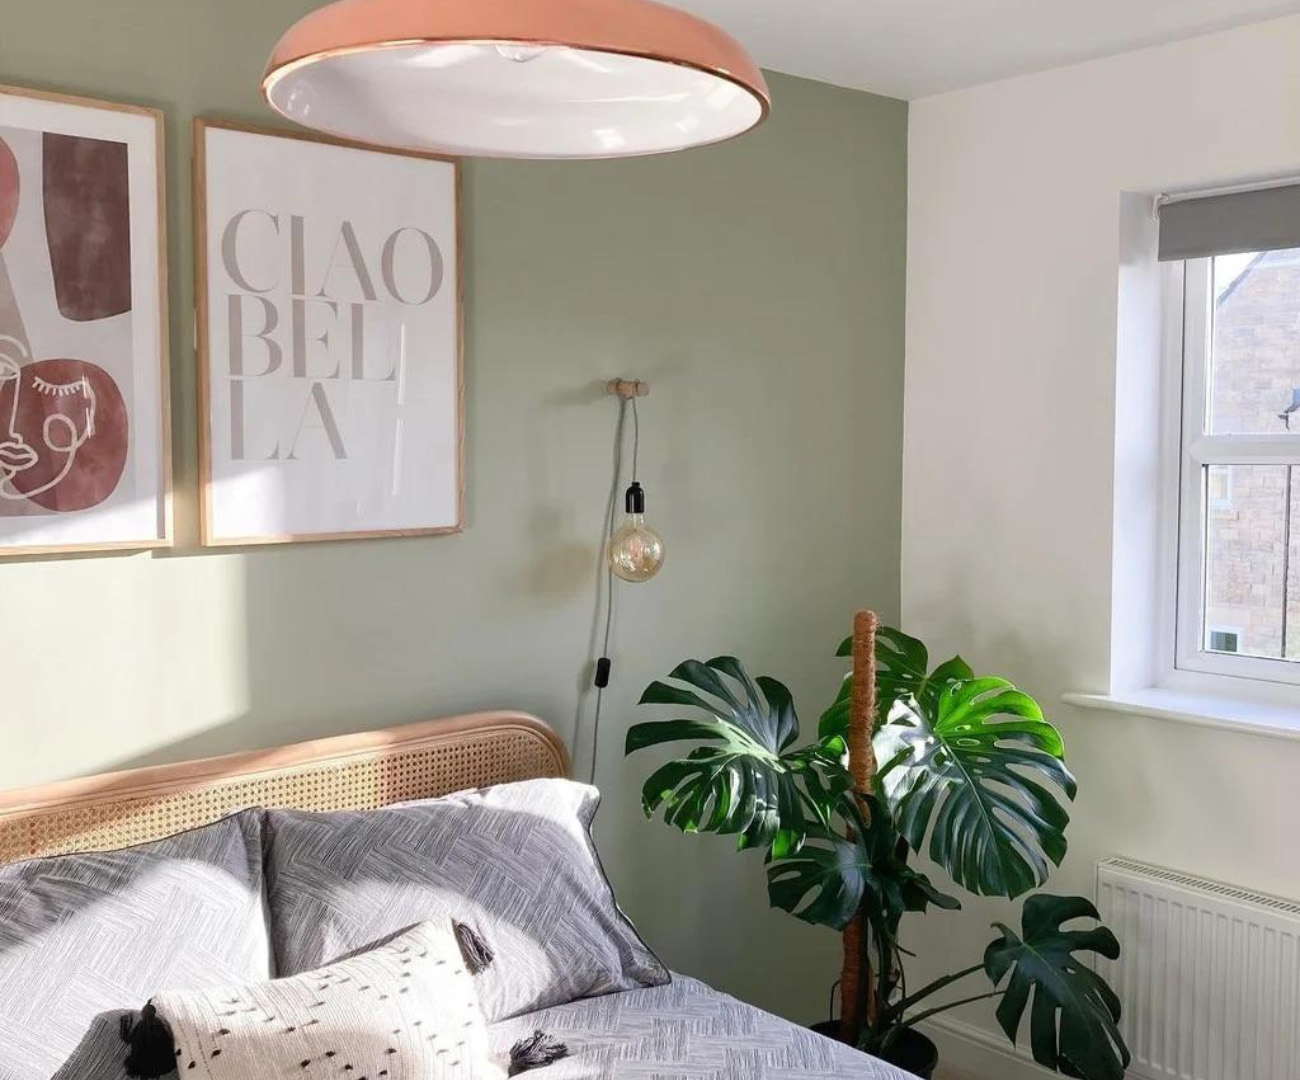 An image of a green decorated bedroom